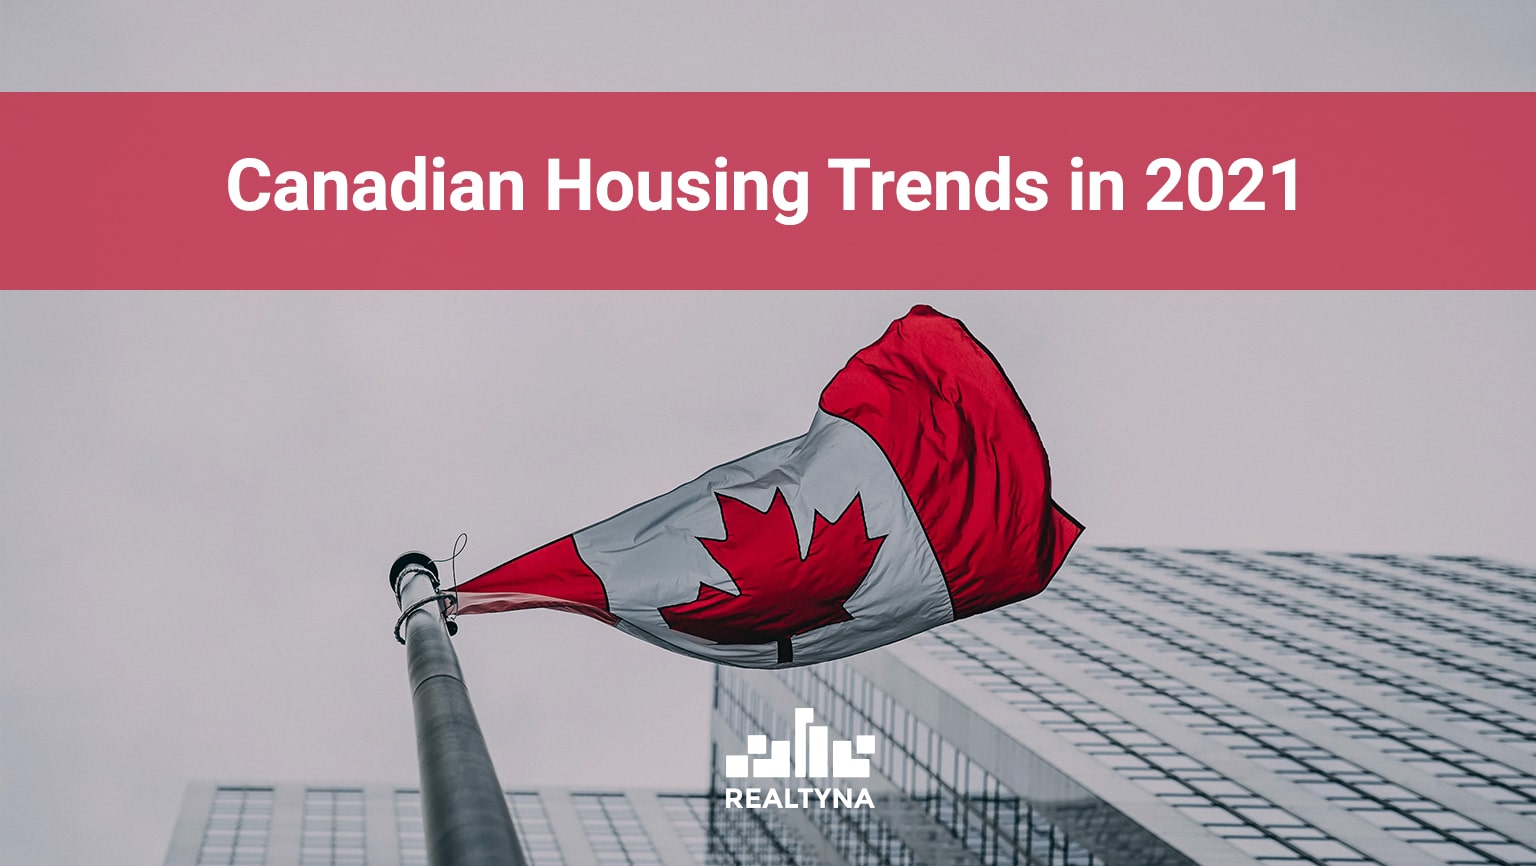 Canada-Housing-Trends-in-2021-Featured-image-min.jpeg